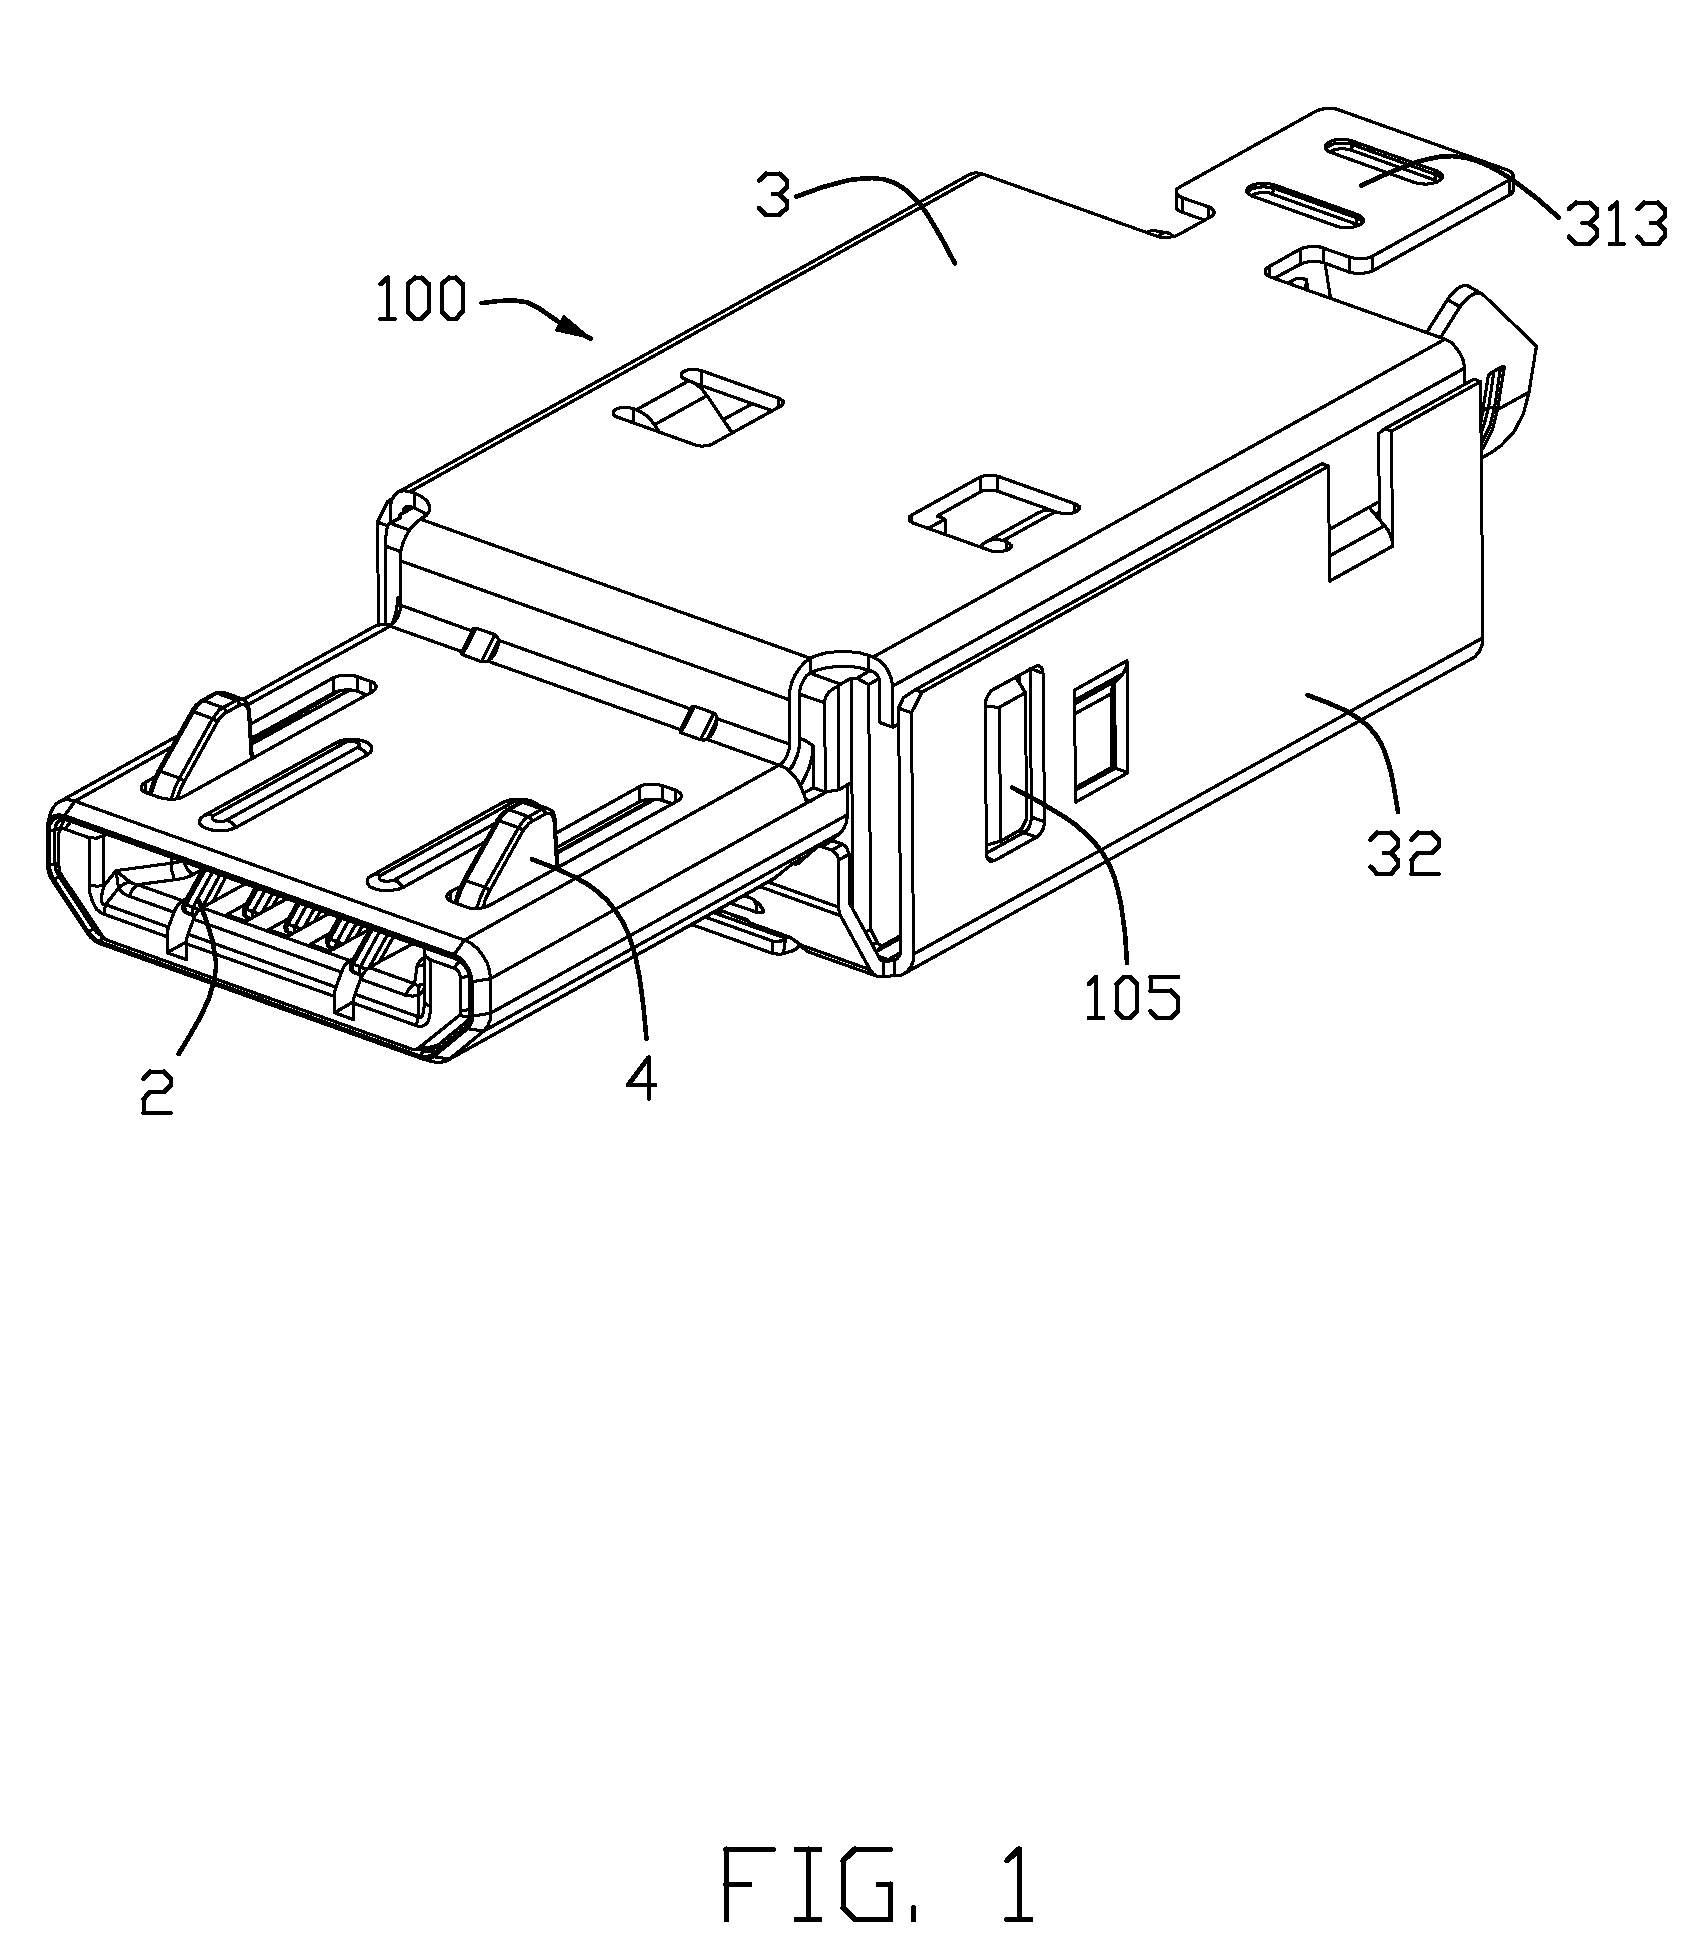 Cable connector assembly with an improved spacer